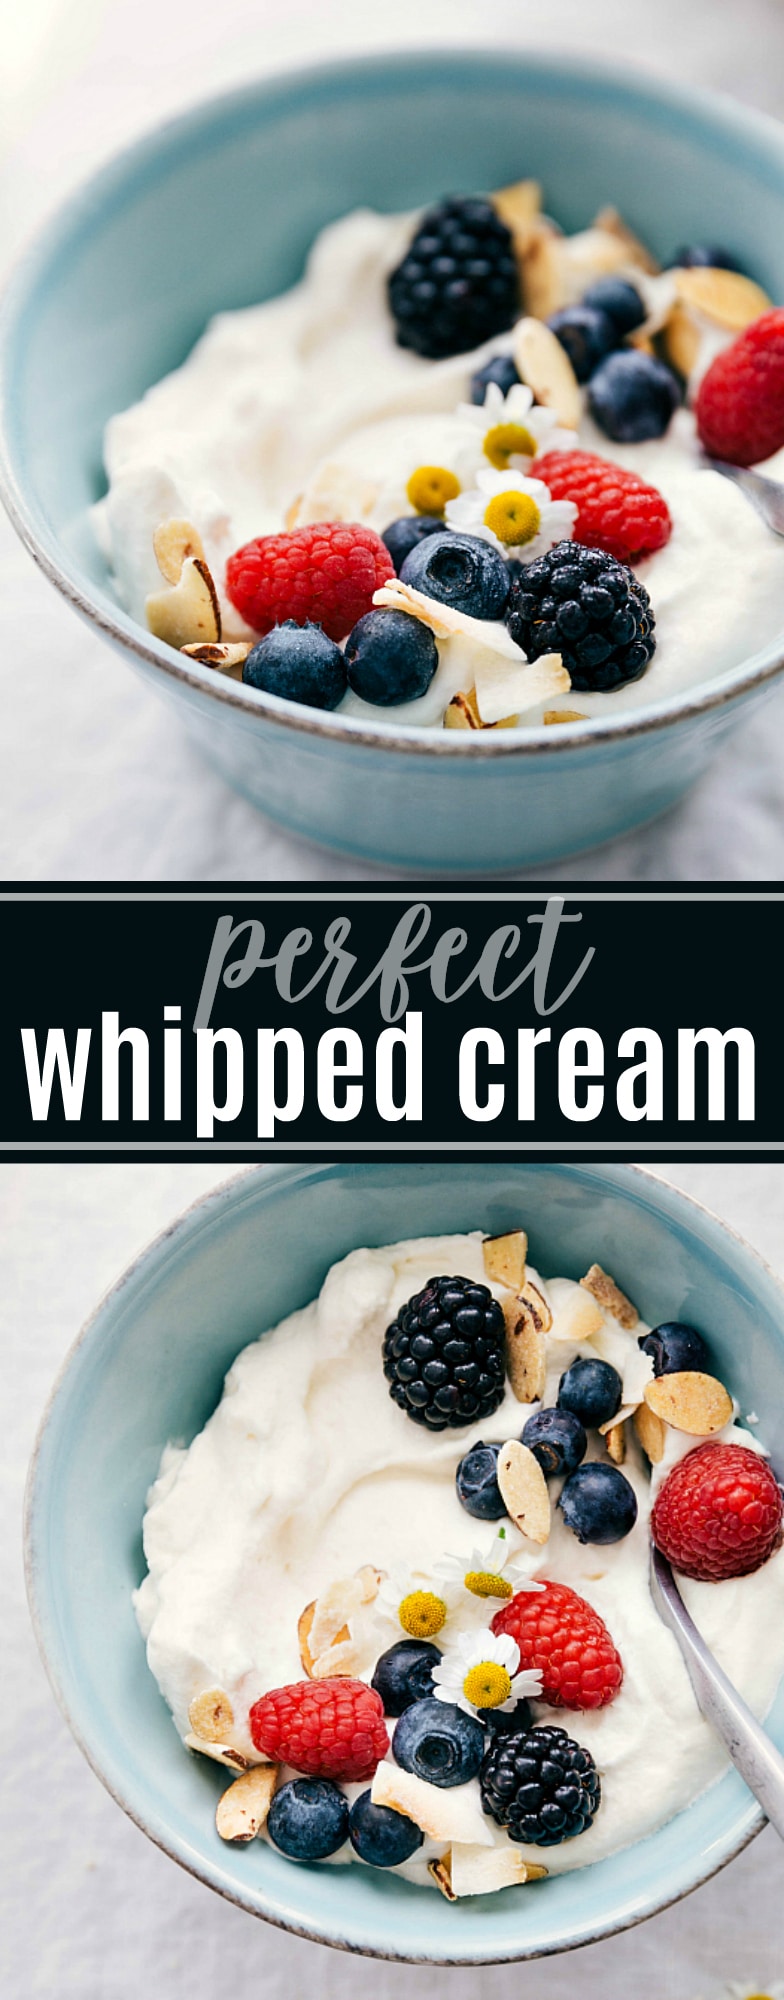 Knowing how to make whipped cream from scratch is handy for so many dishes and desserts. This recipe gives you all the steps, tips, and tricks to make perfect delicious whipped cream every time. via chelseasmessyapron.com #how #to #whipped #cream #homemade #heavy #cream #dessert #treat #easy #quick